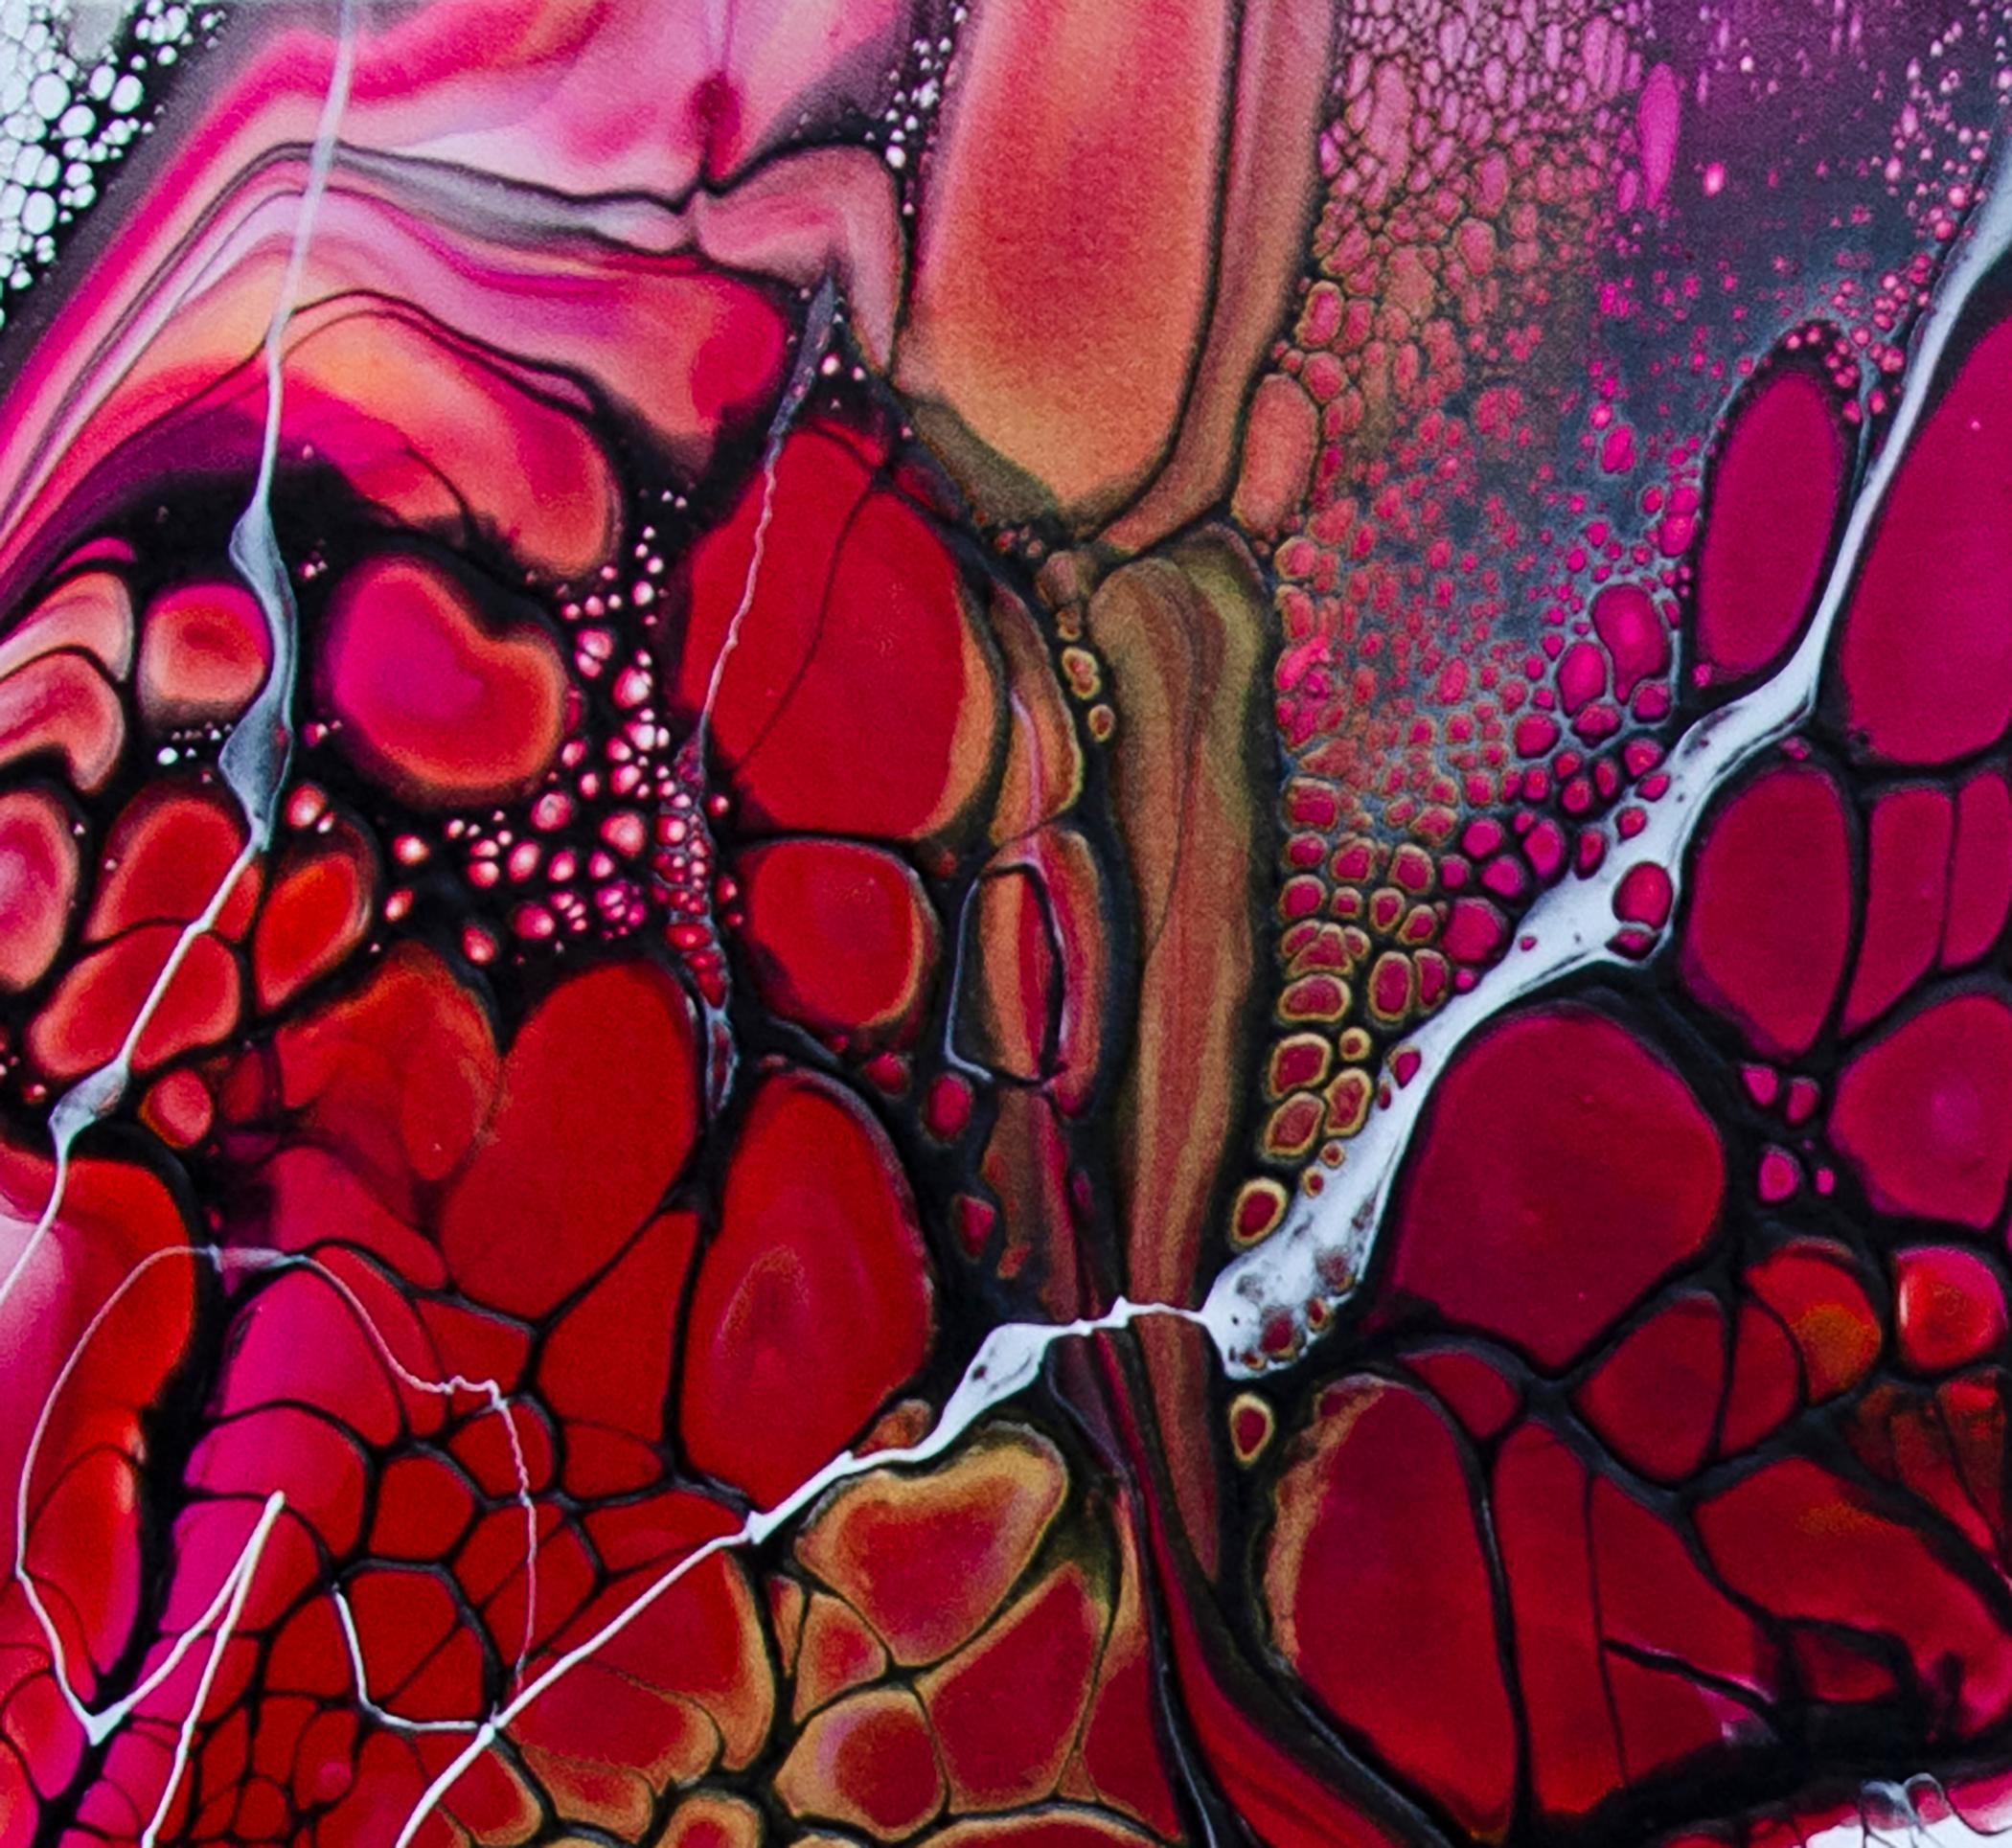 <p>Artist Comments<br>This abstract painting features vibrant red, pink, and orange hues. Black cells form organic shapes that infuse the composition with a sense of fluidity and dynamic energy. The artwork, made with the acrylic pouring method, is